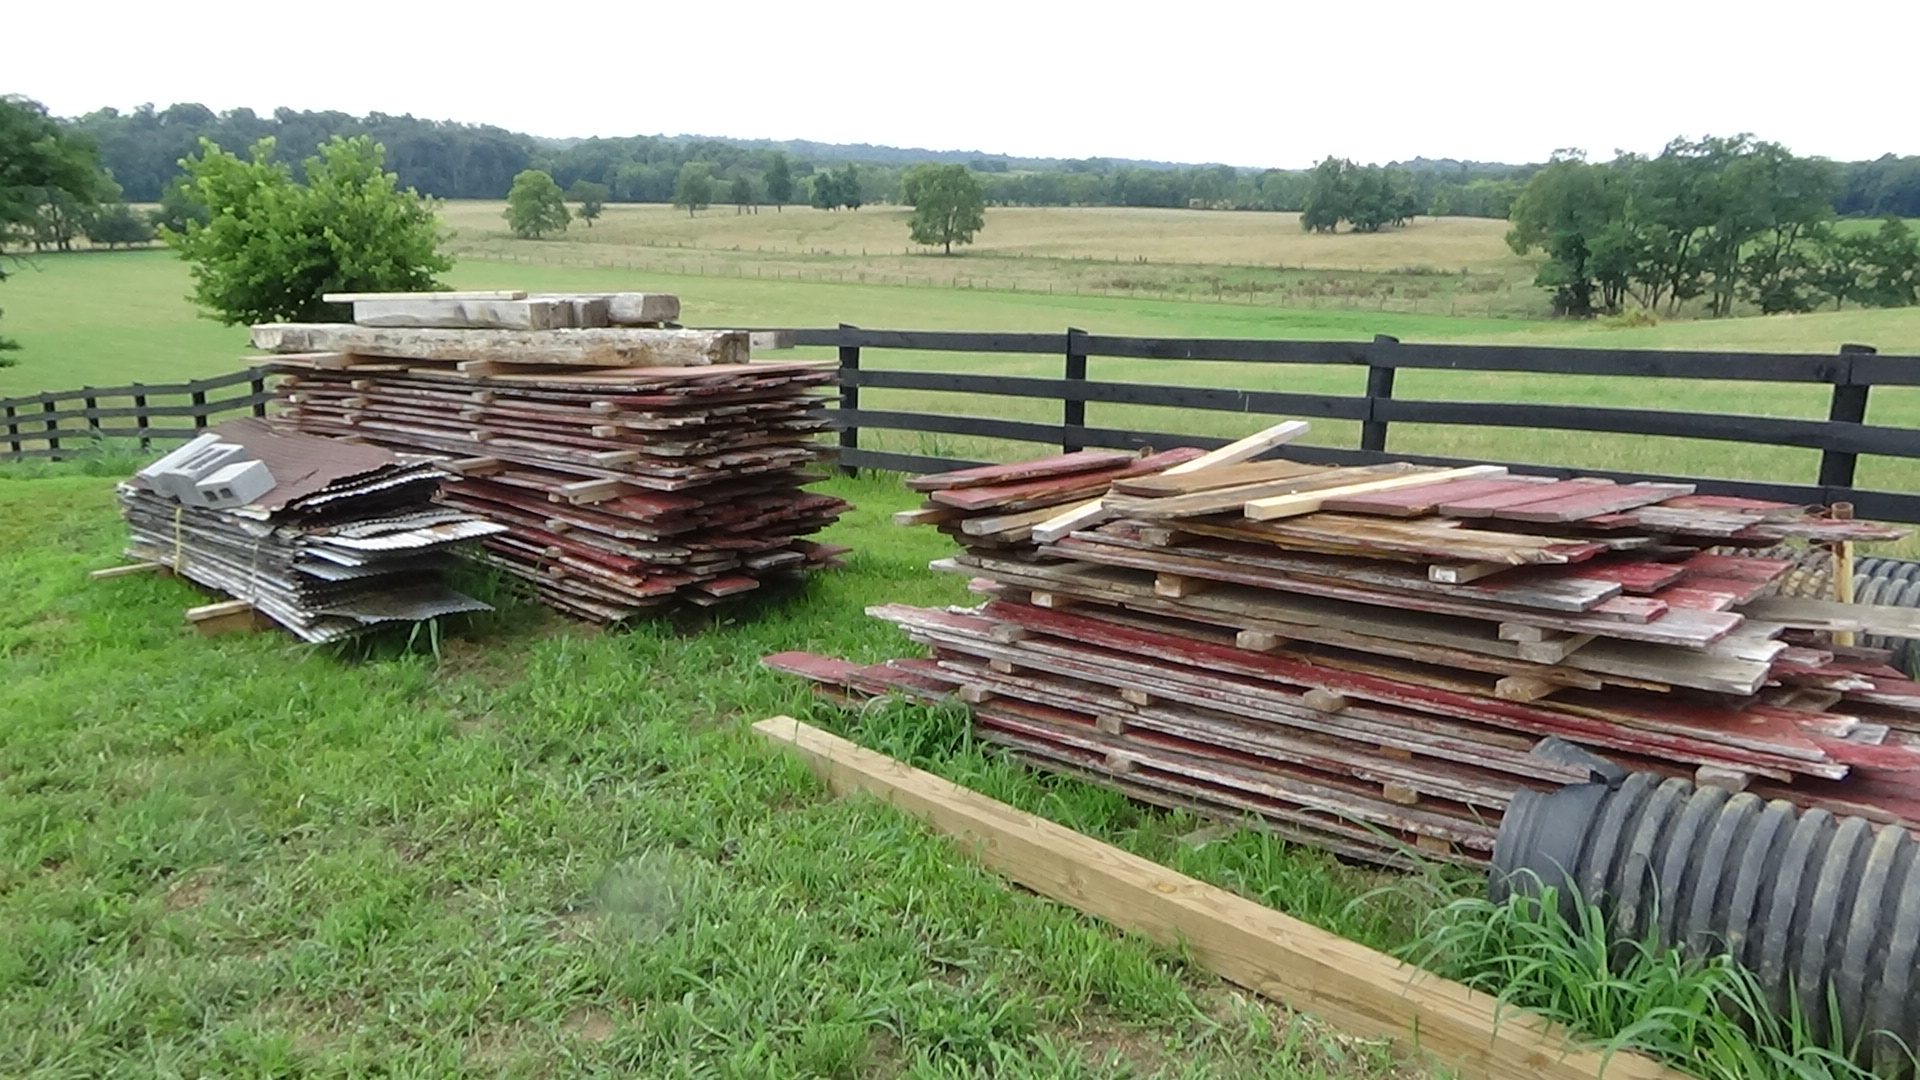 6 Pastures Barn Siding - Reclaimed Wood from Cochran's Lumber